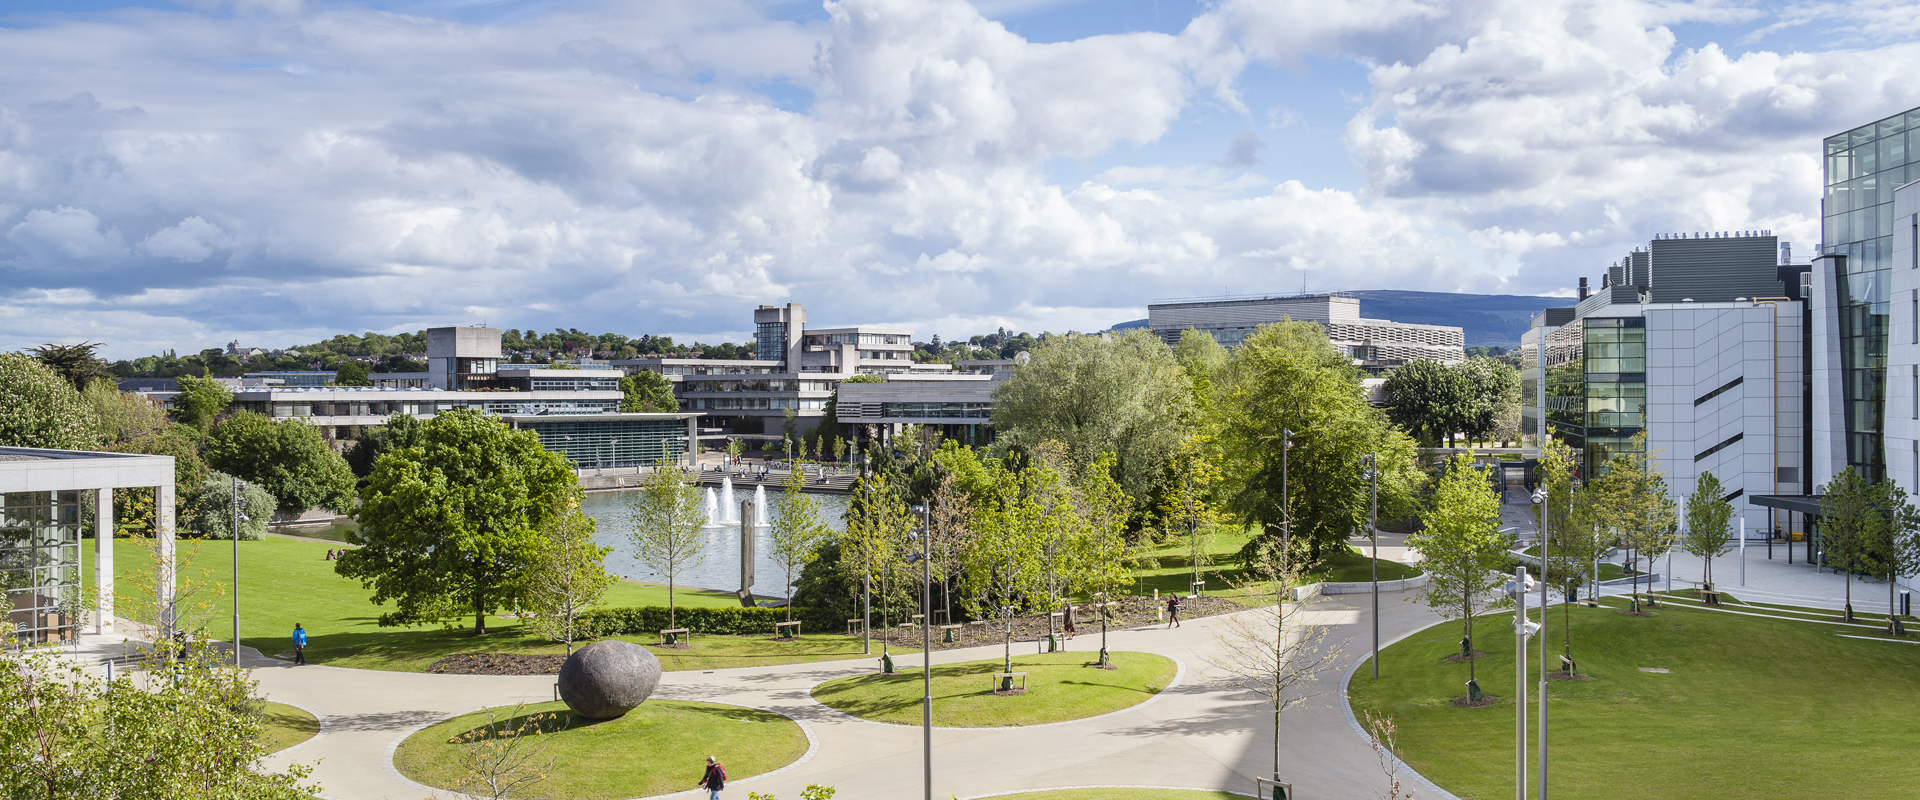 Image of the UCD campus